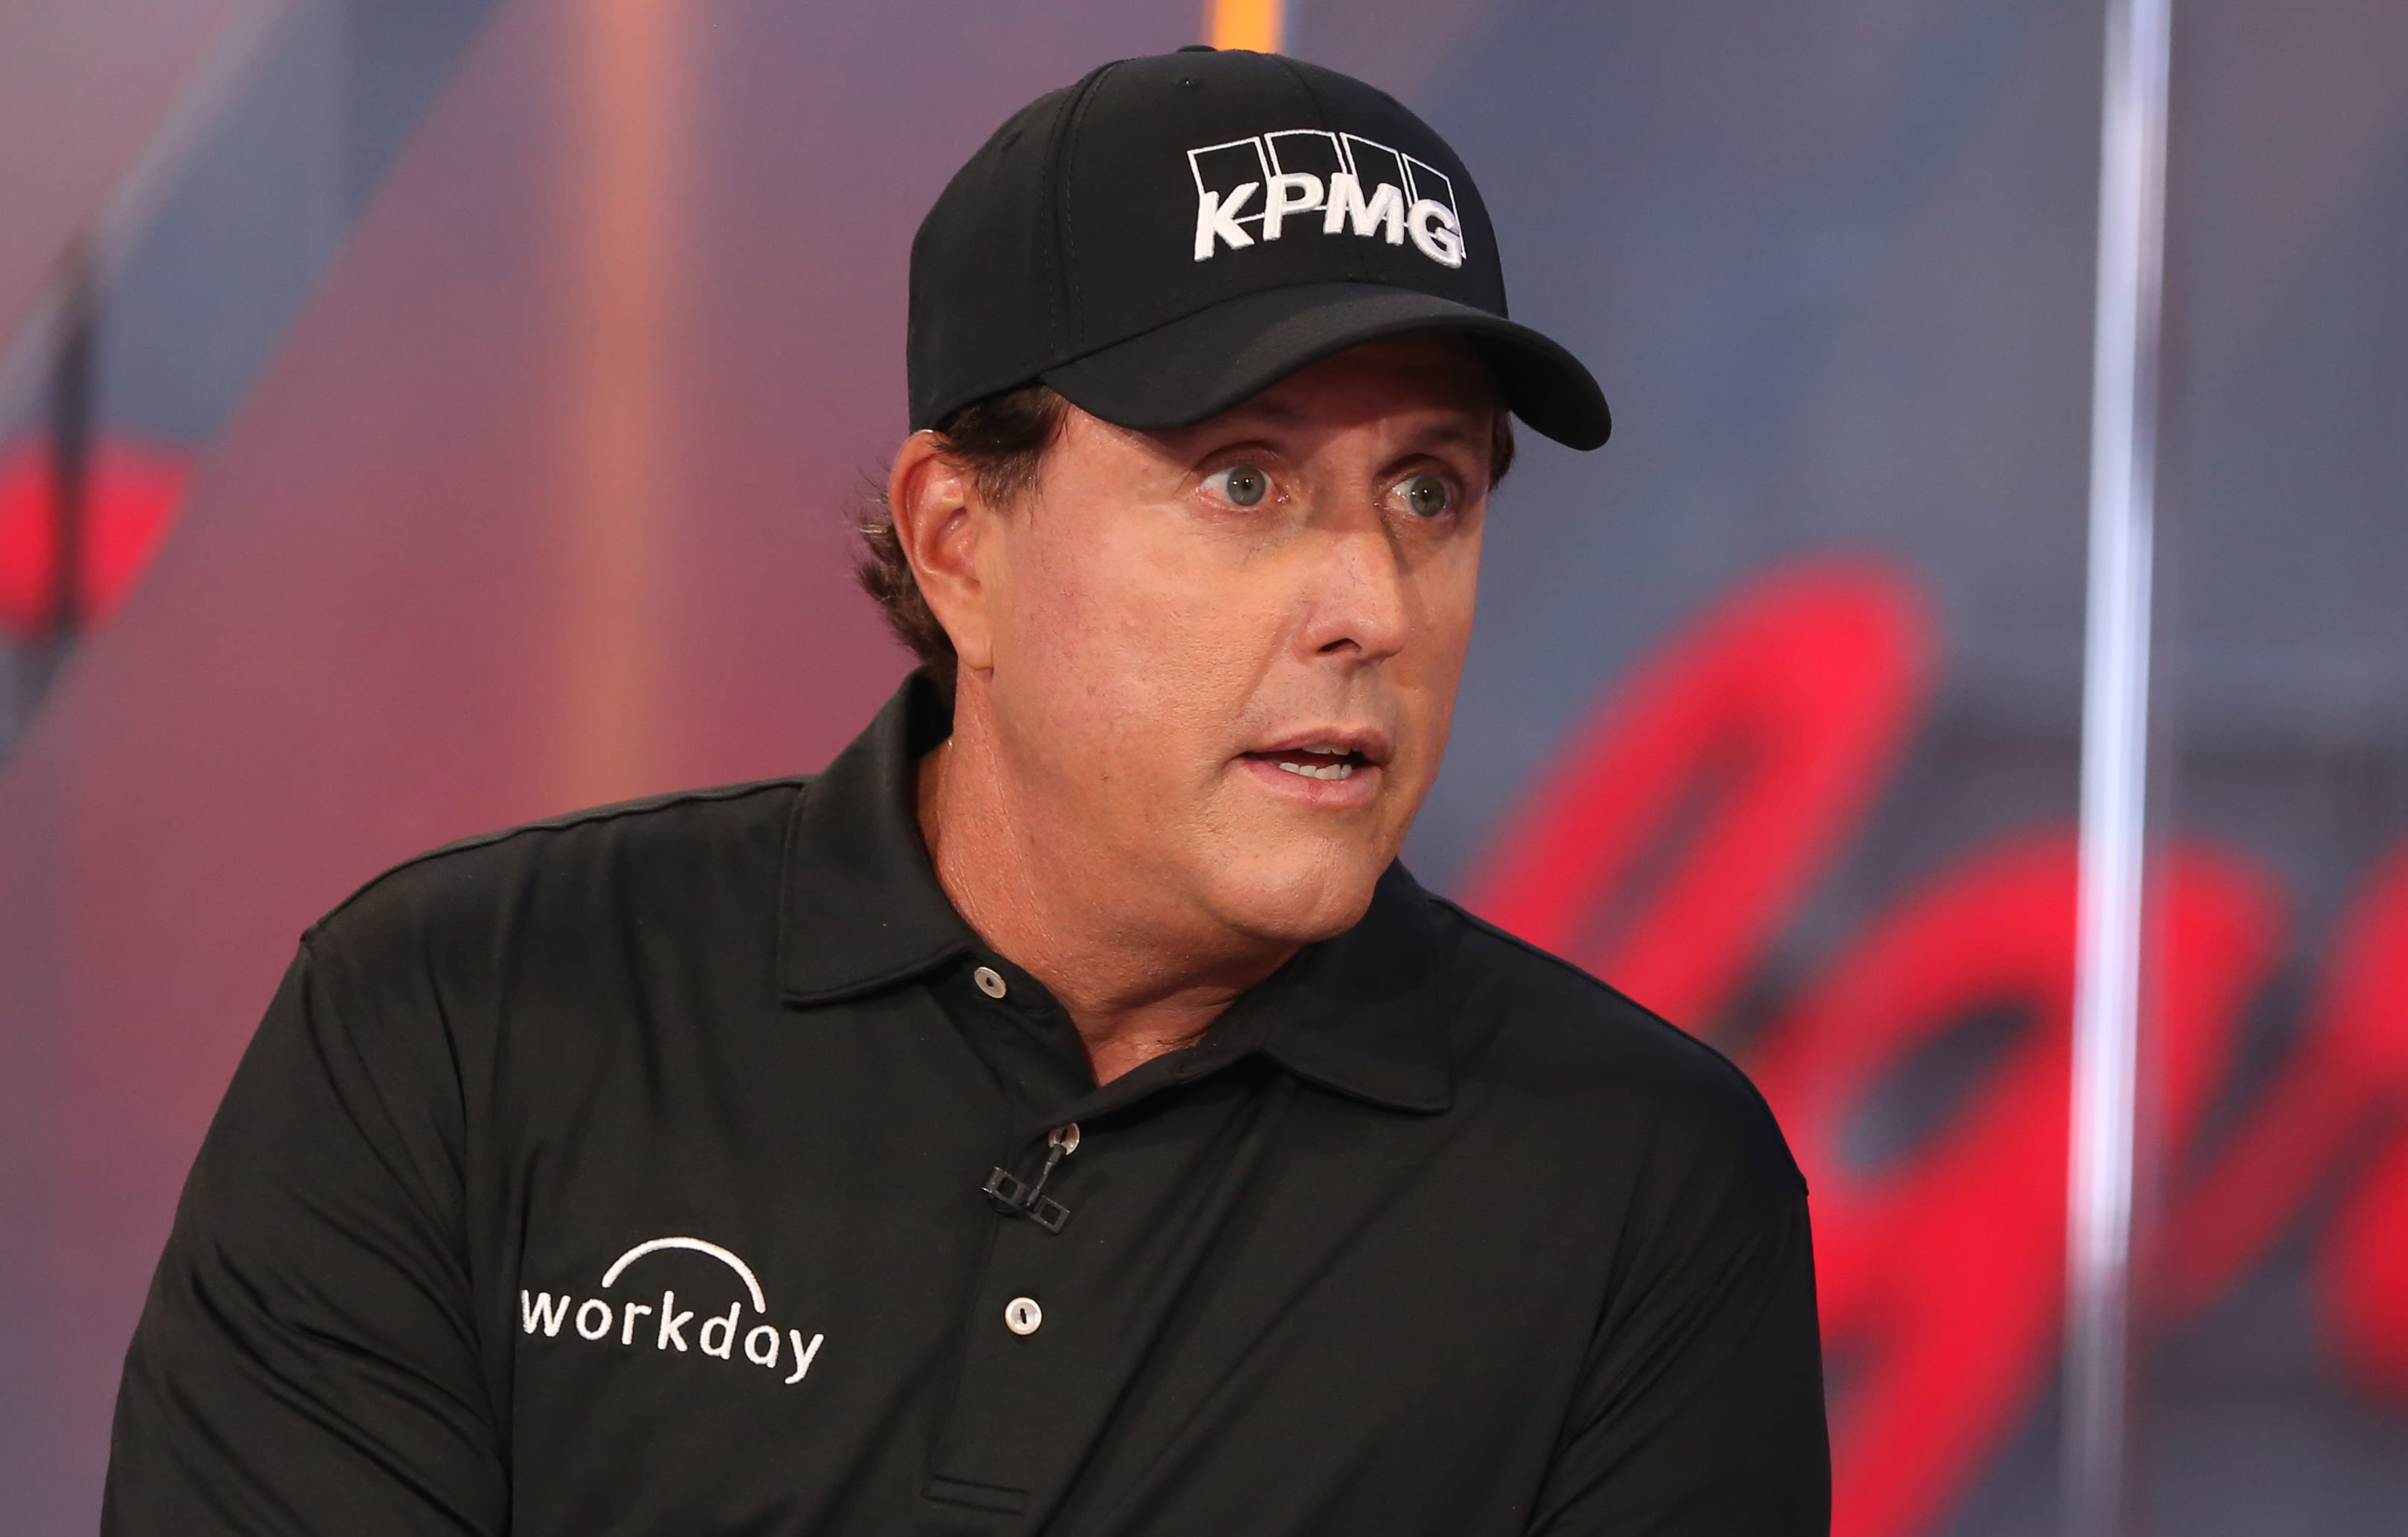 PGA Championship: Phil Mickelson becomes oldest major winner in history with two-shot win